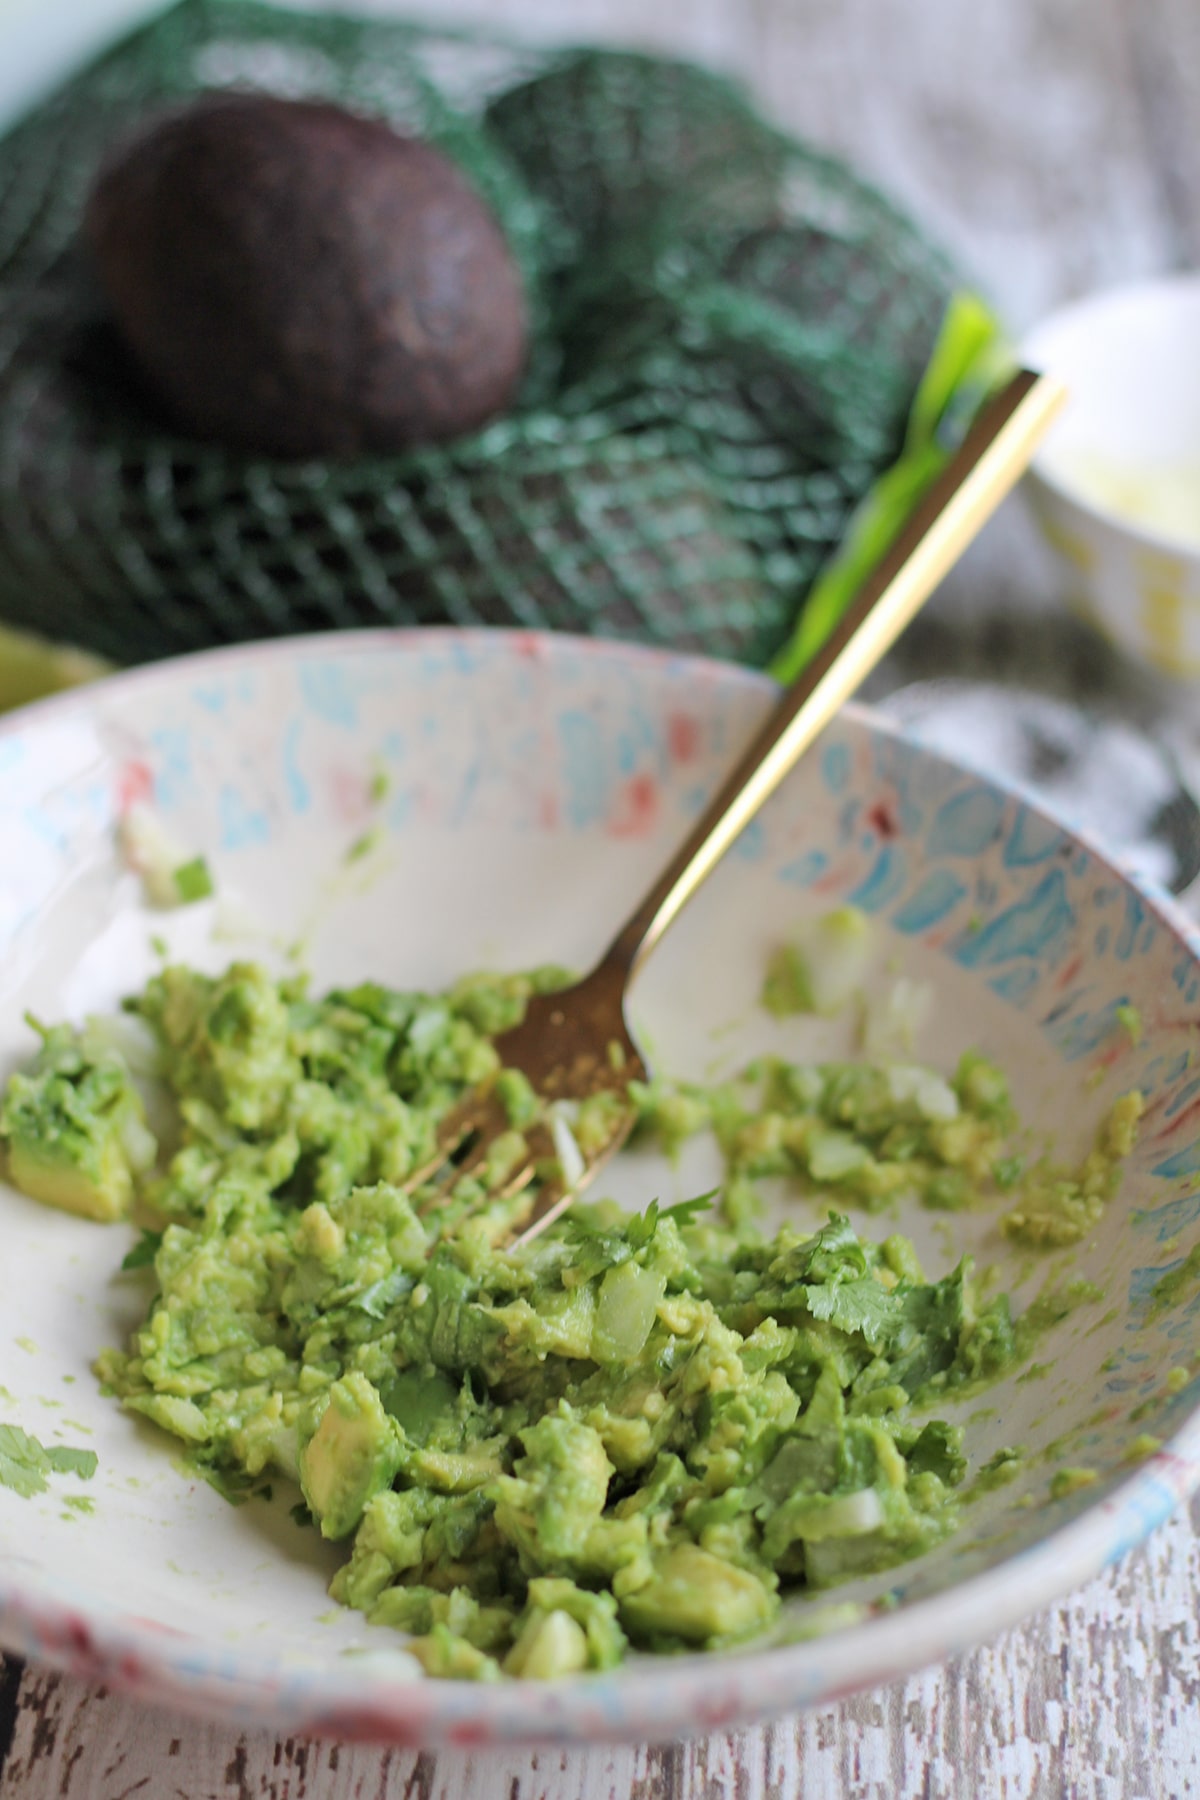 Avocado being smashed in bowl with garlic and cilantro.